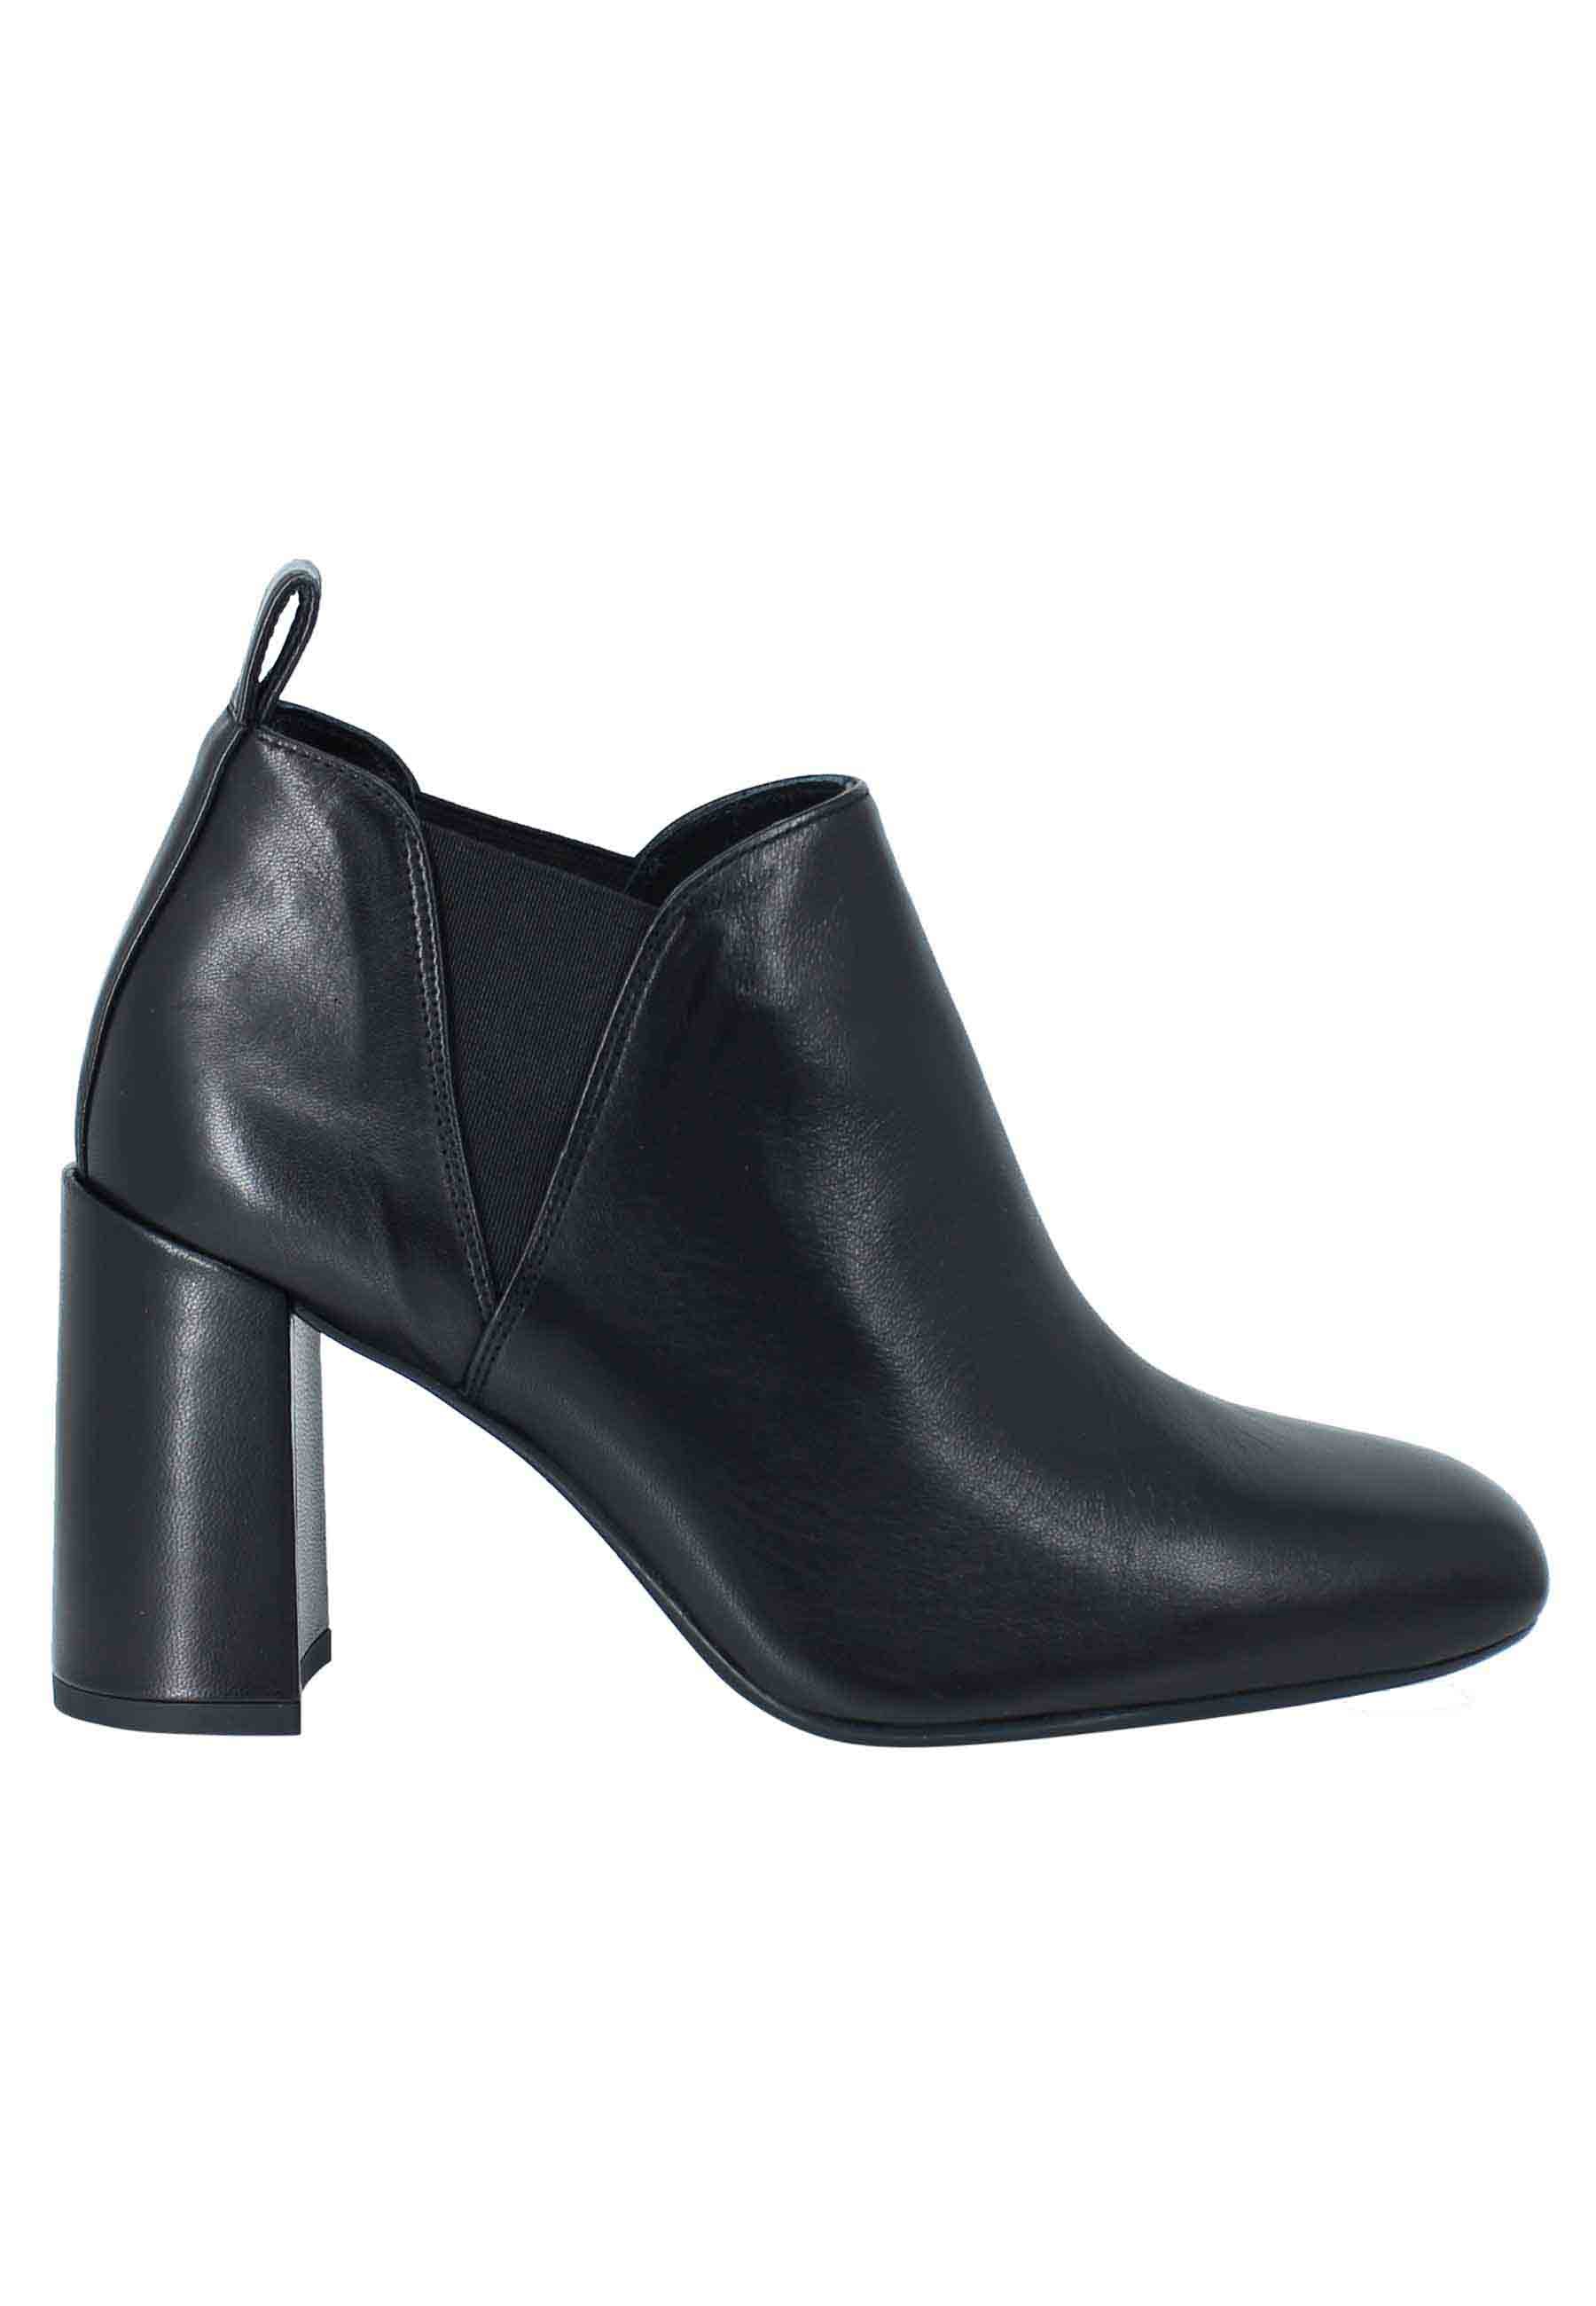 Women's ankle boots in black leather with high heel and square toe